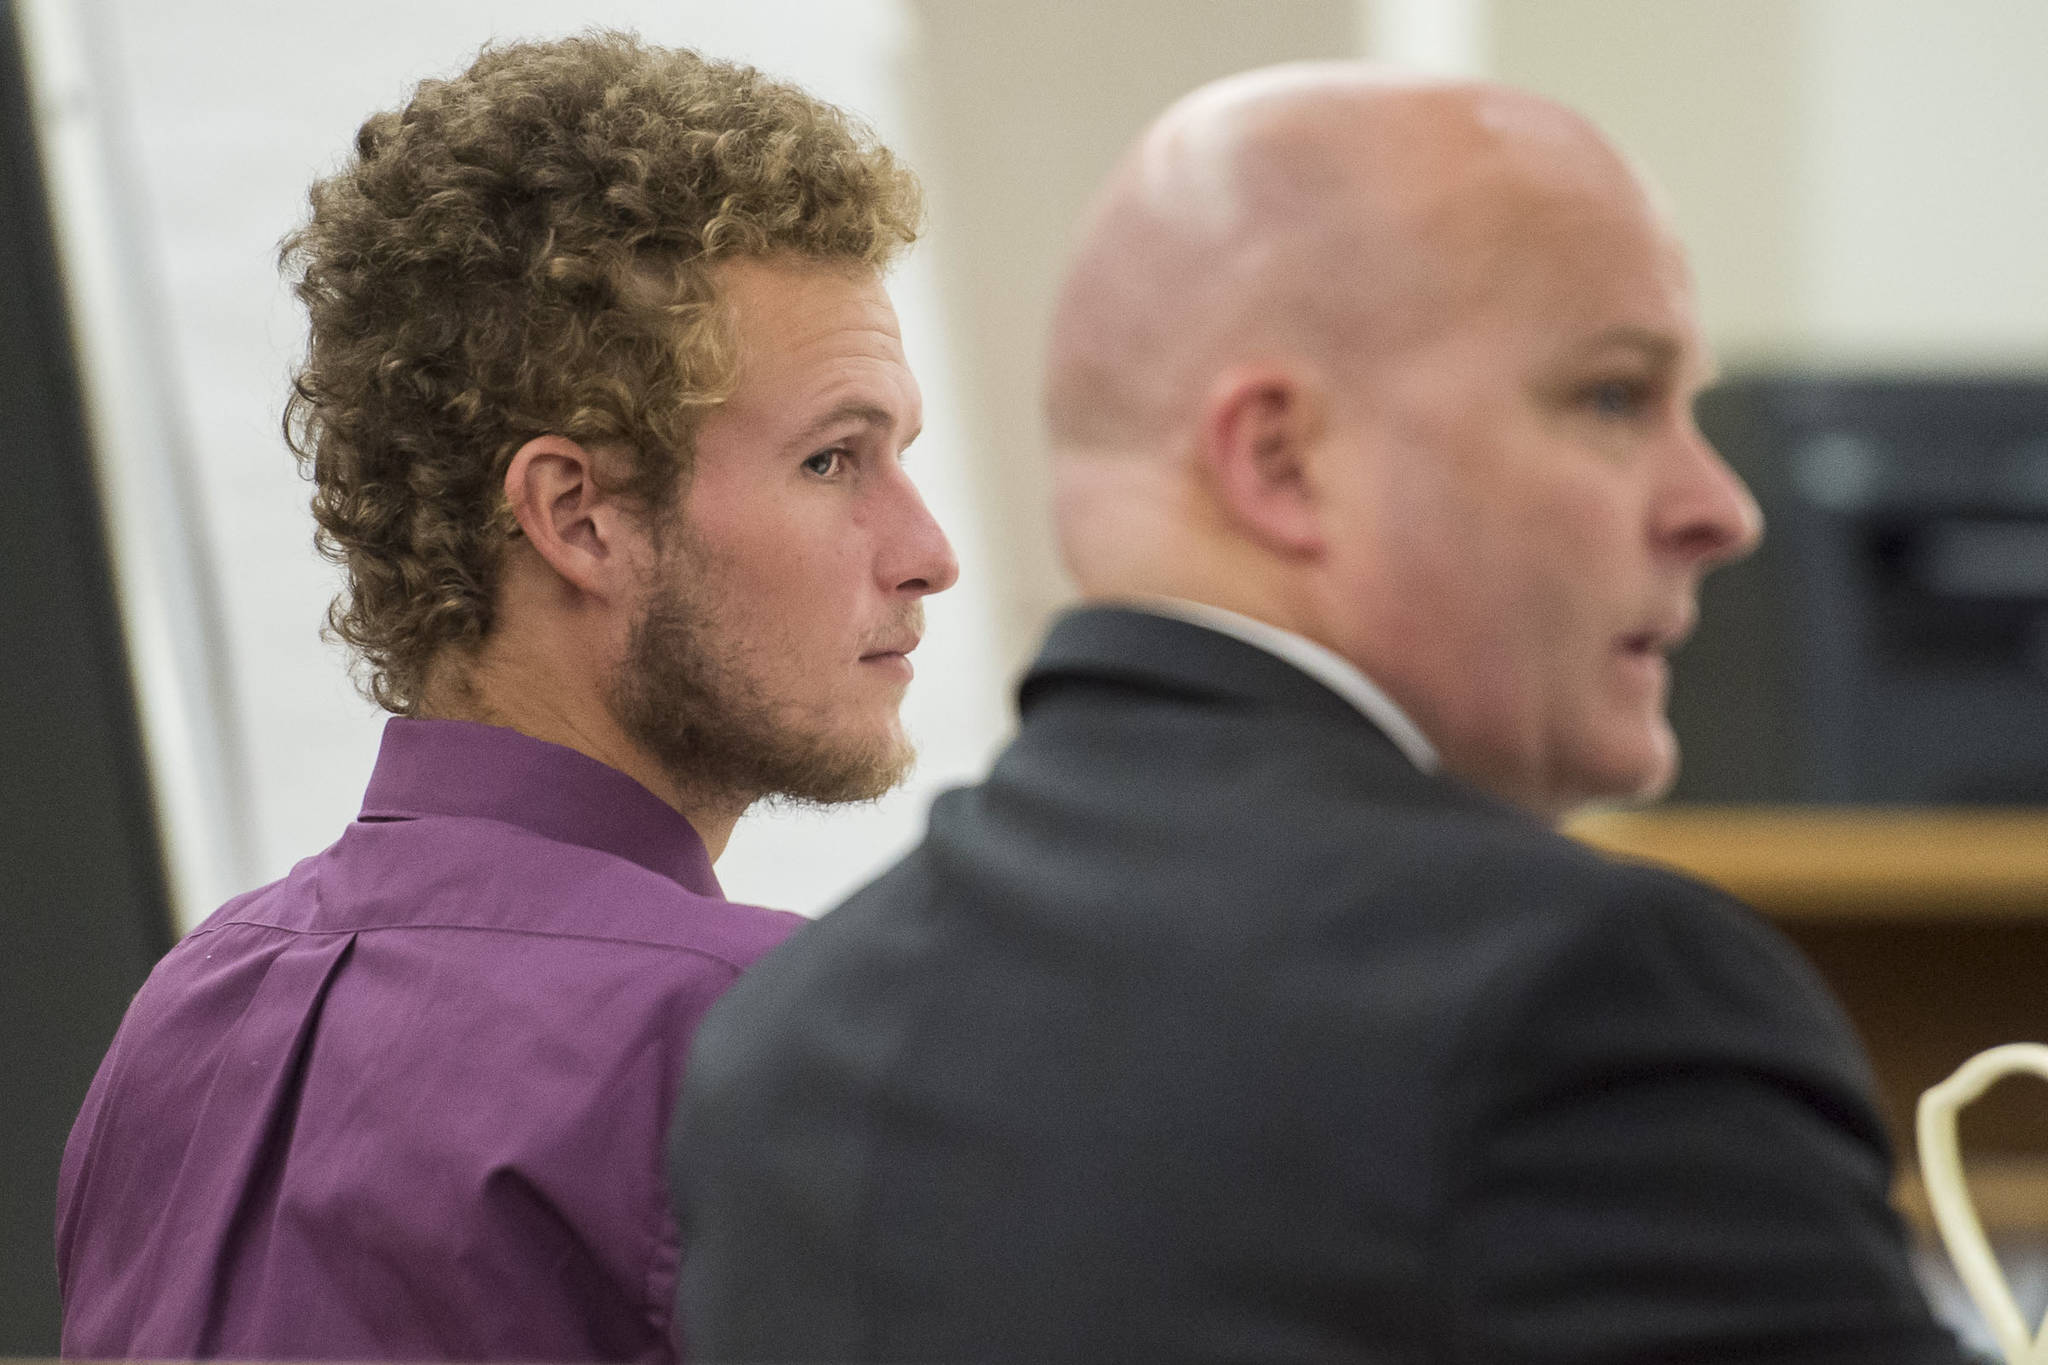 Ty Grussendorf, 24, left, appears in Juneau Superior Court with his attorney, John P. Cashion, to plead guilty to two counts of sexual abuse of a minor on Monday, Oct. 22, 2018. (Michael Penn | Juneau Empire)